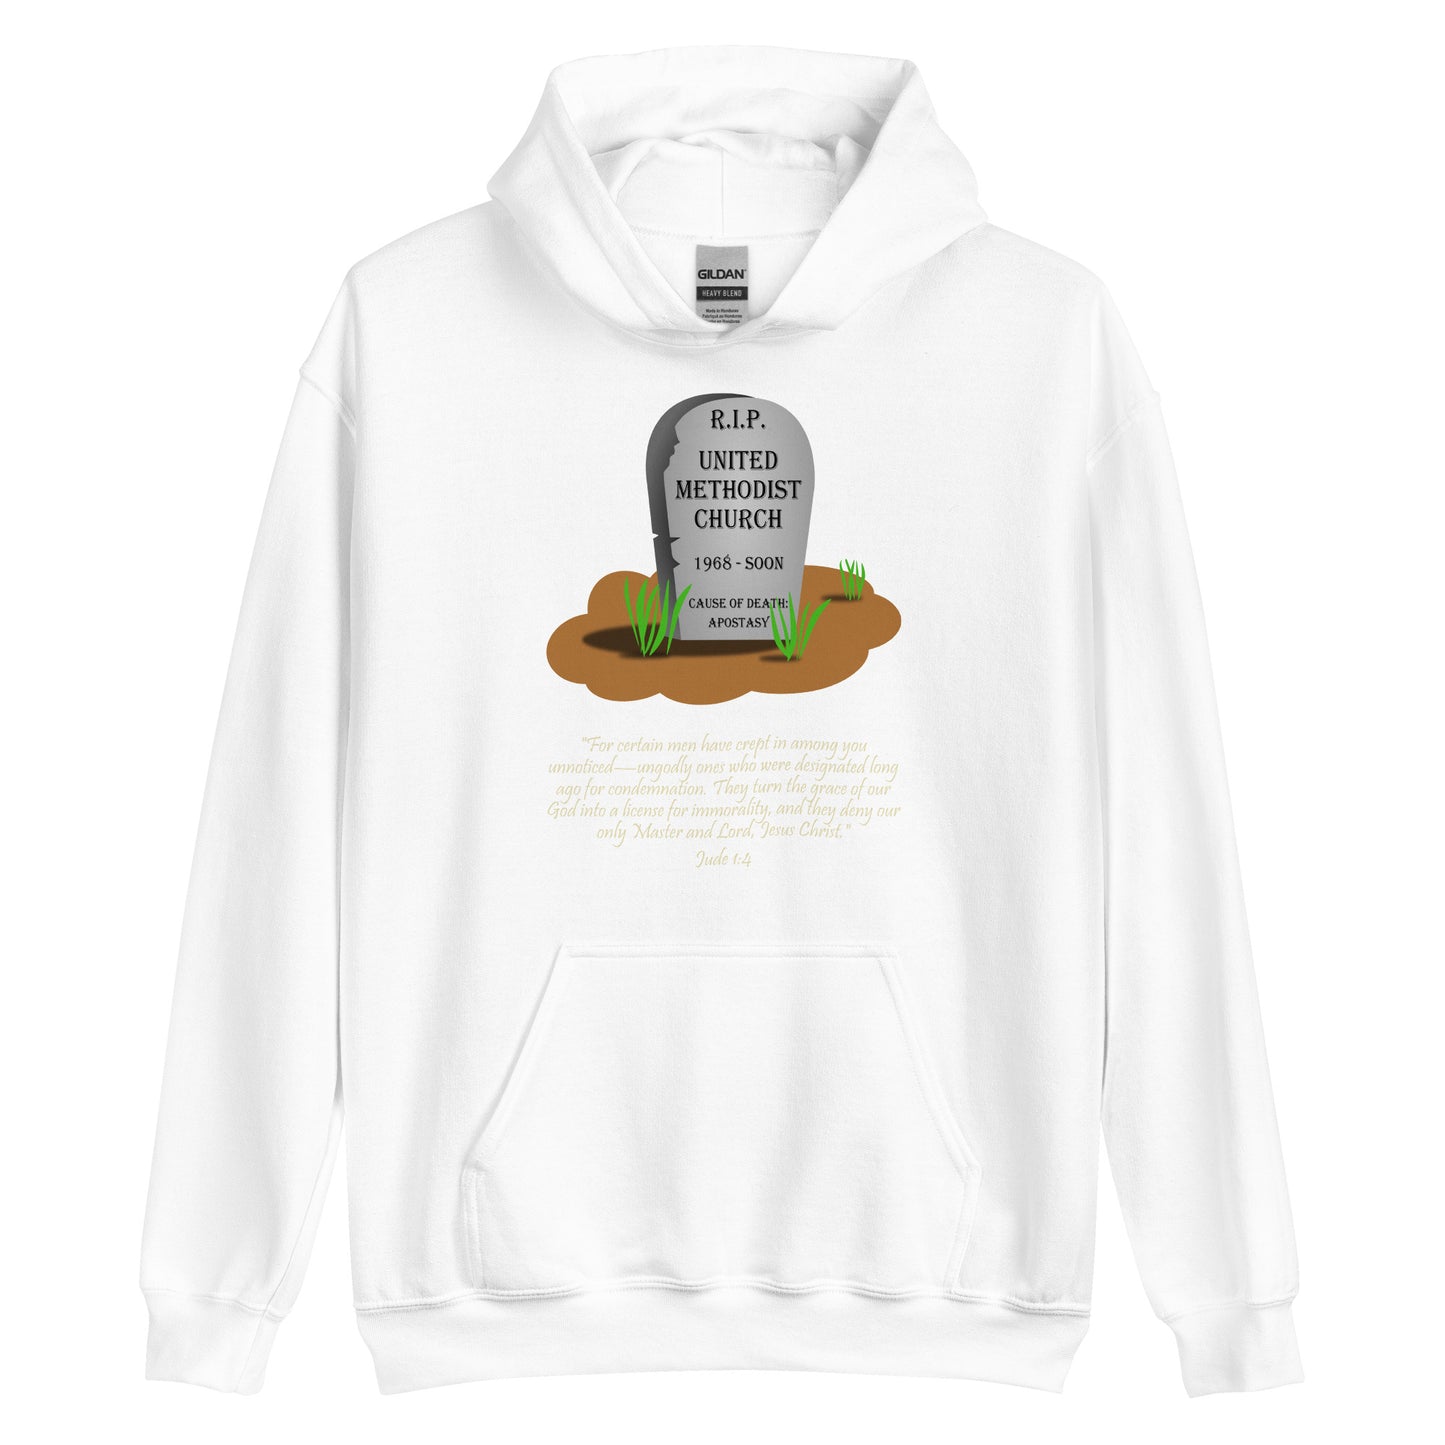 A009 Hoodie – Gildan 18500 Unisex Hoodie Featuring Jude 1:4 with a Graphic of a Tombstone Bearing the Text “R.I.P. United Methodist Church, 1968-SOON, Cause of Death: Apostasy.